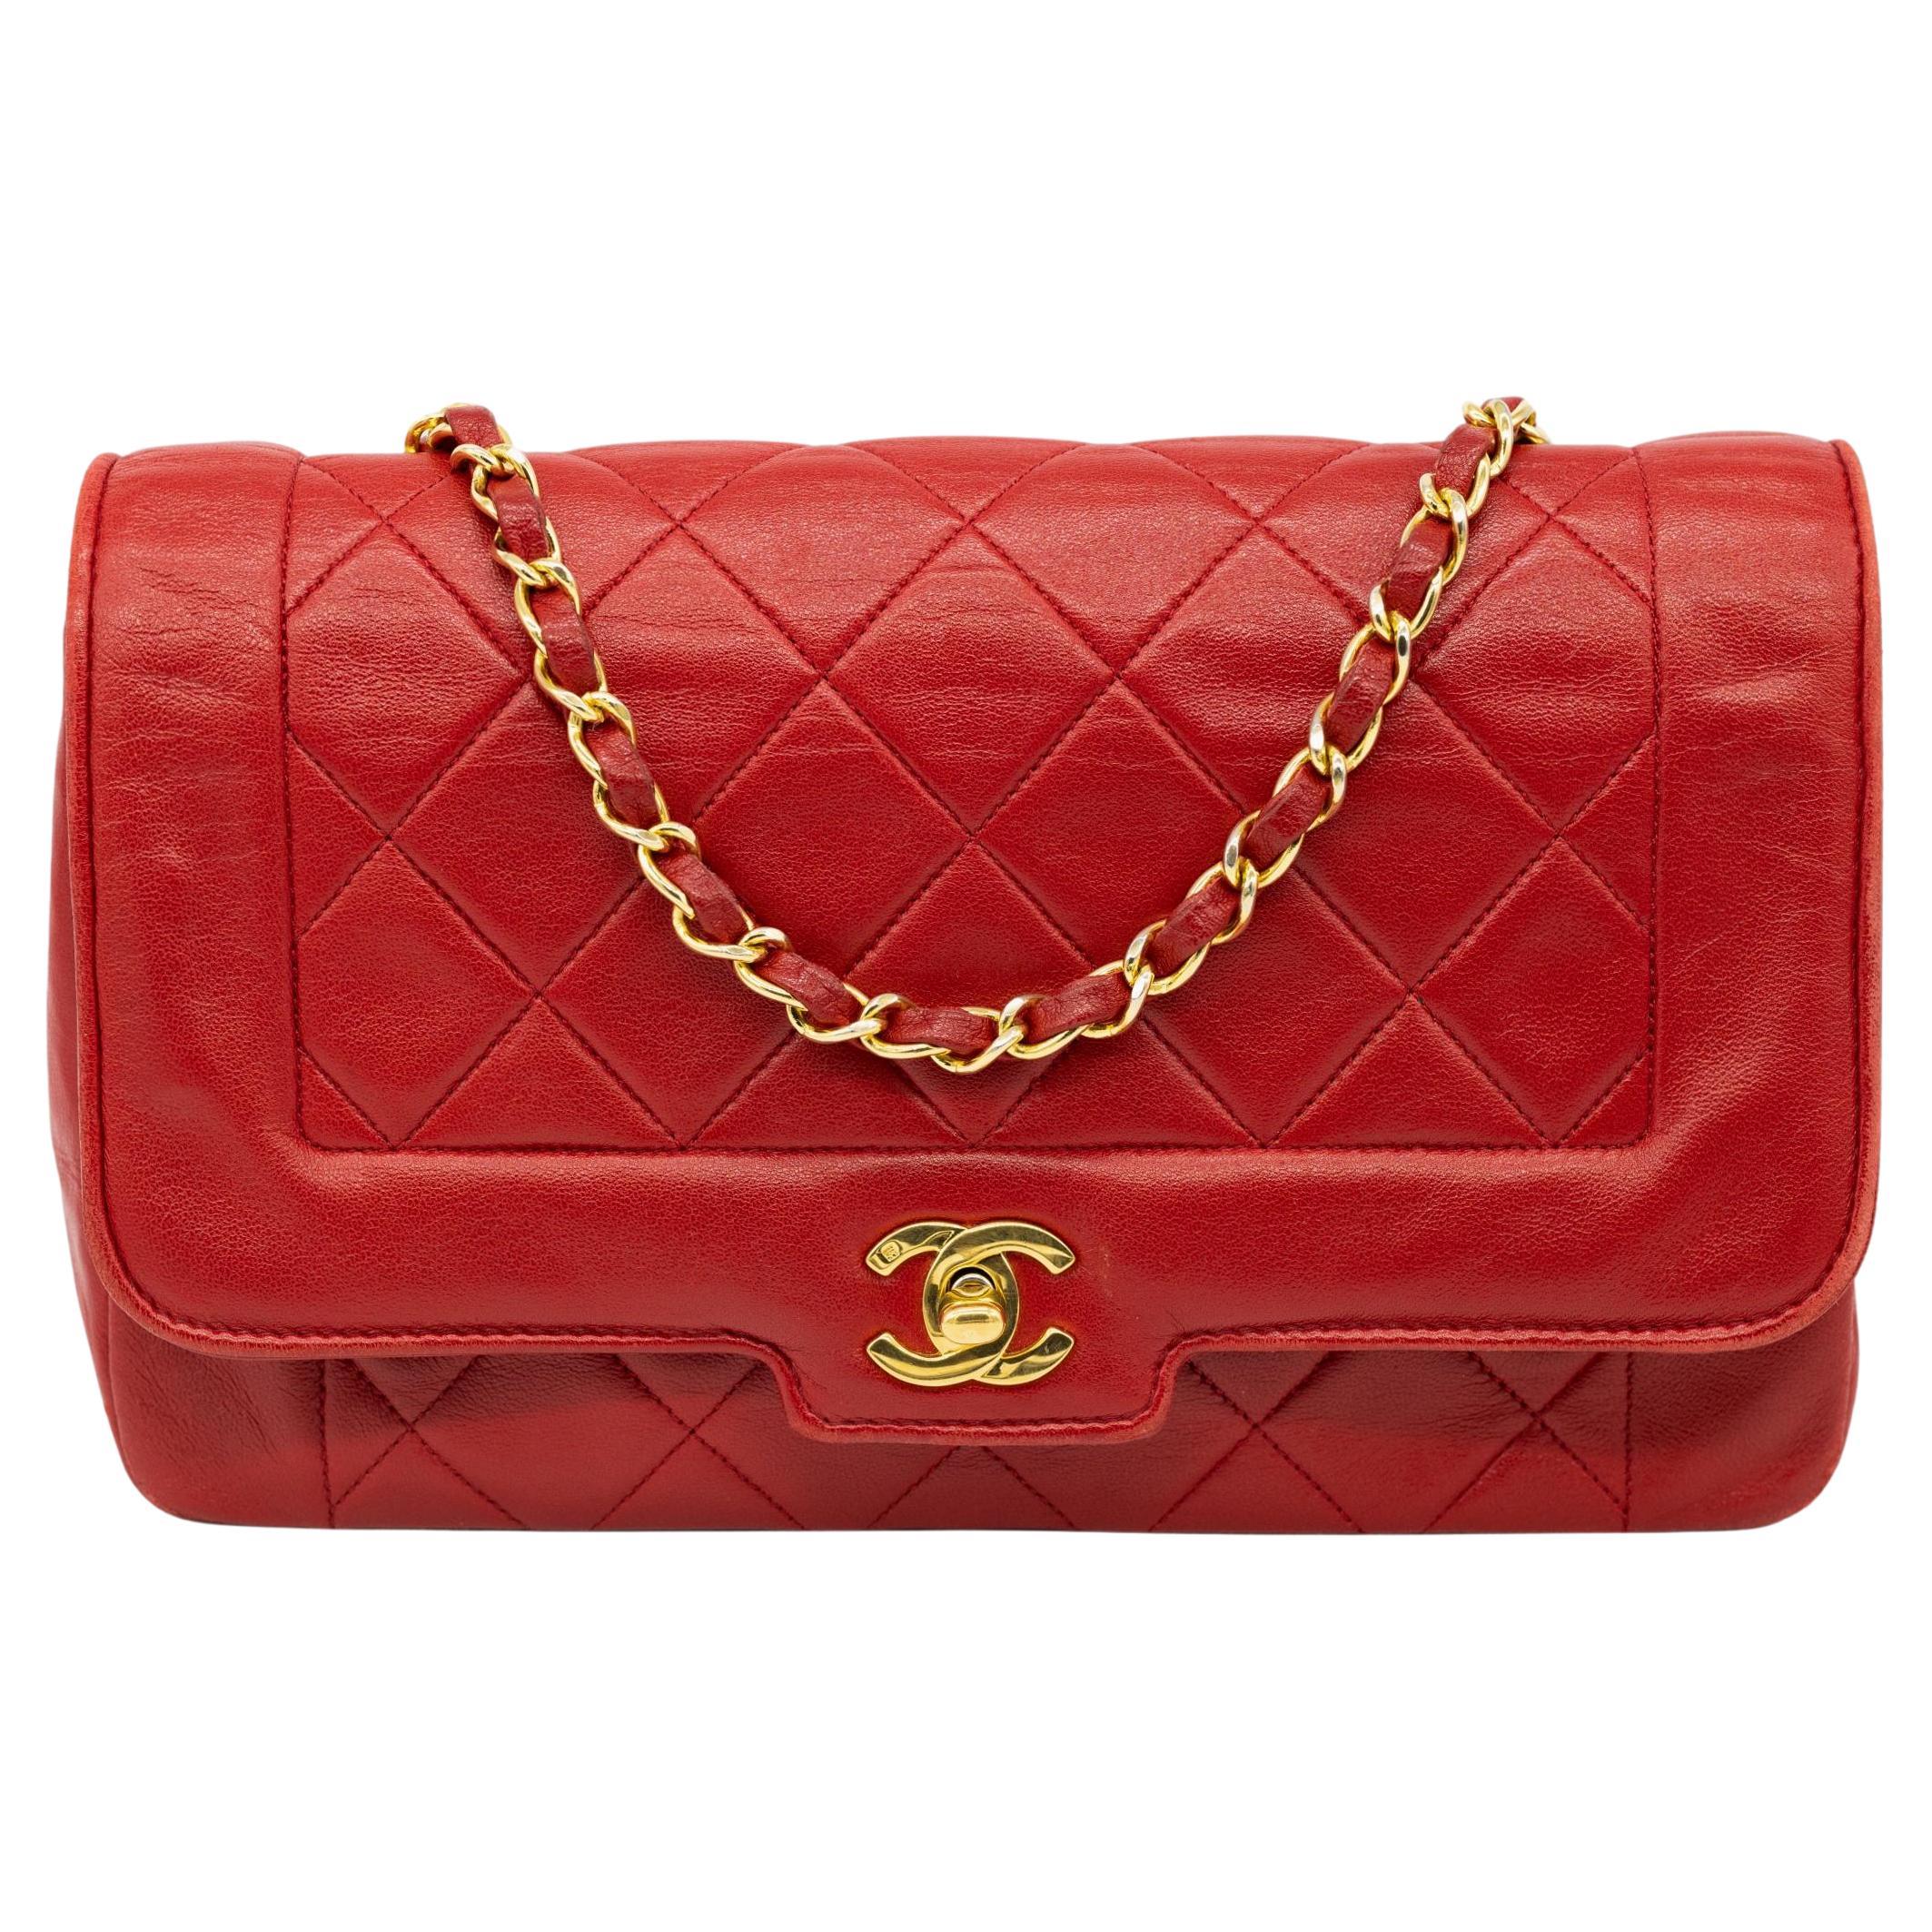 Chanel Vintage Burgundy Quilted Caviar Leather Camera Bag with